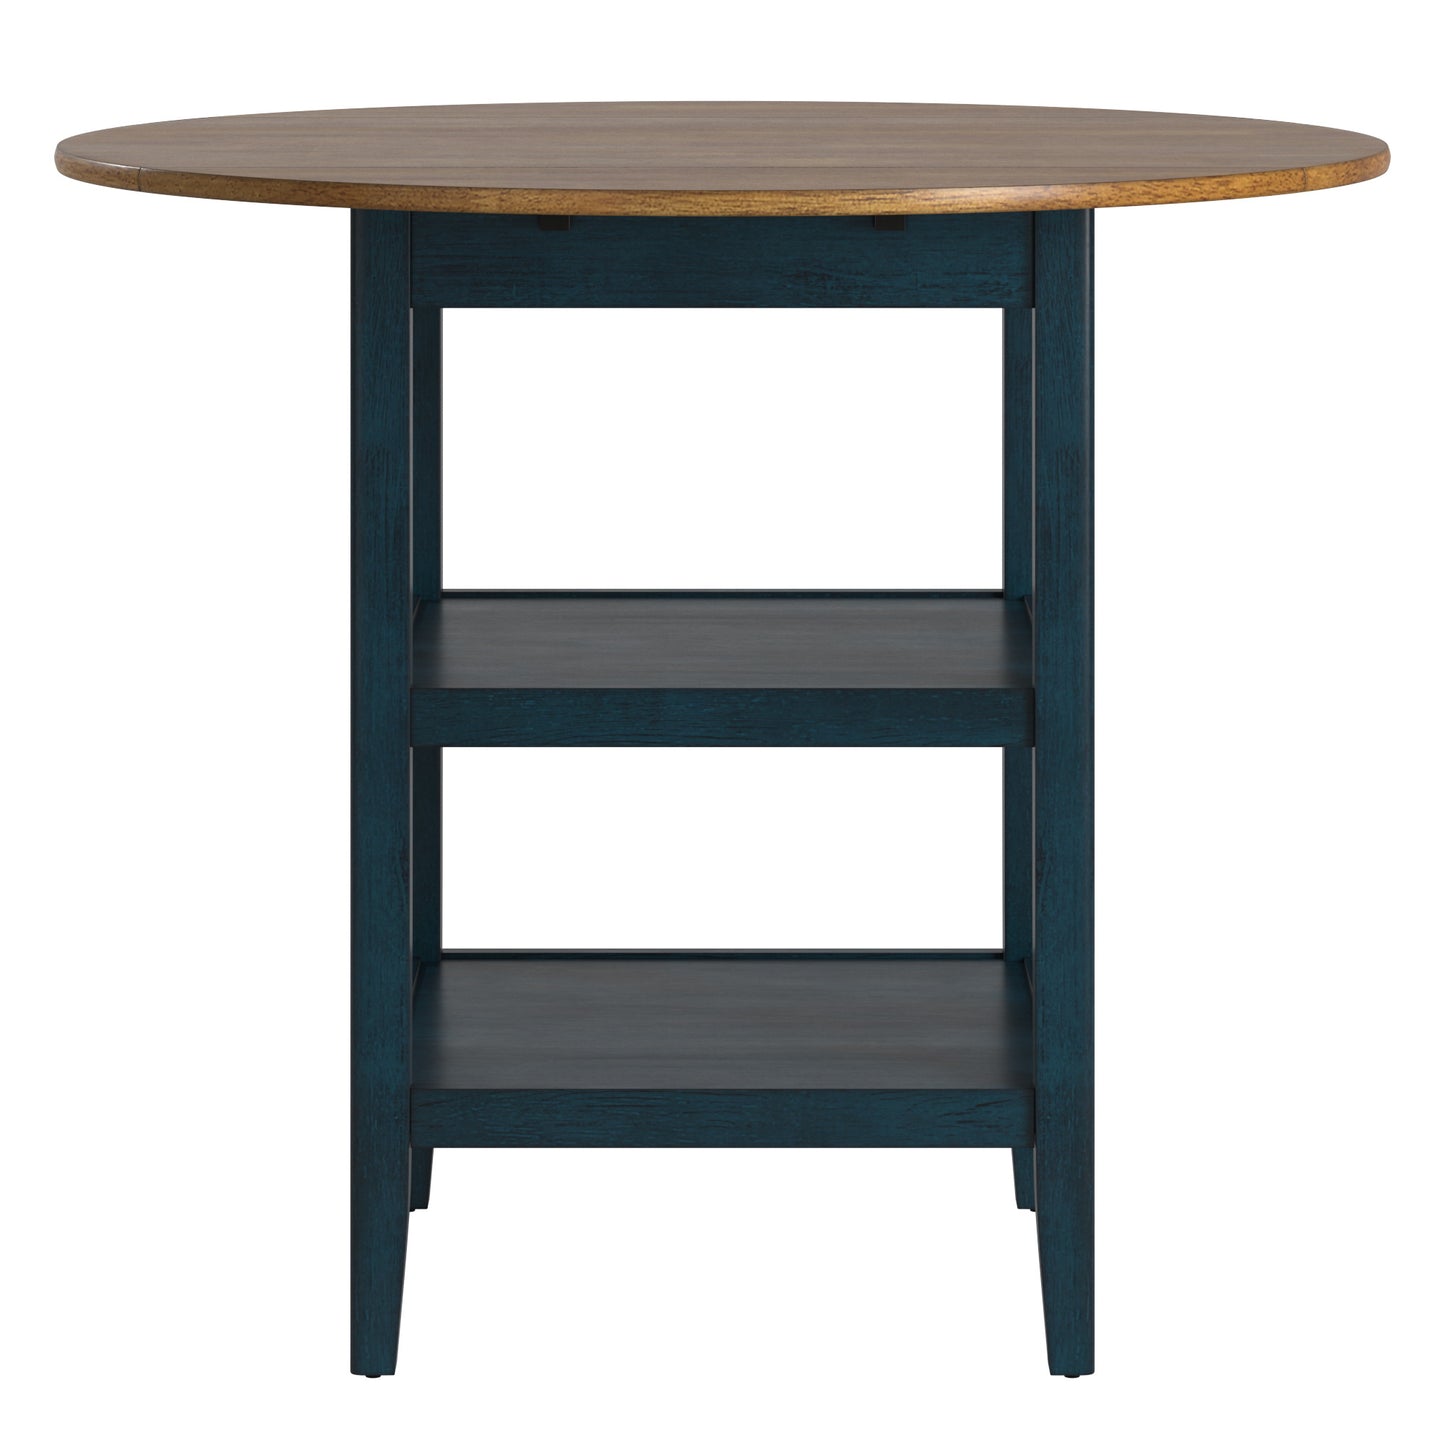 Antique Finish Drop Leaf Round Counter Height Dining Set - Antique Denim, Double X-Back Chair, 3-Piece